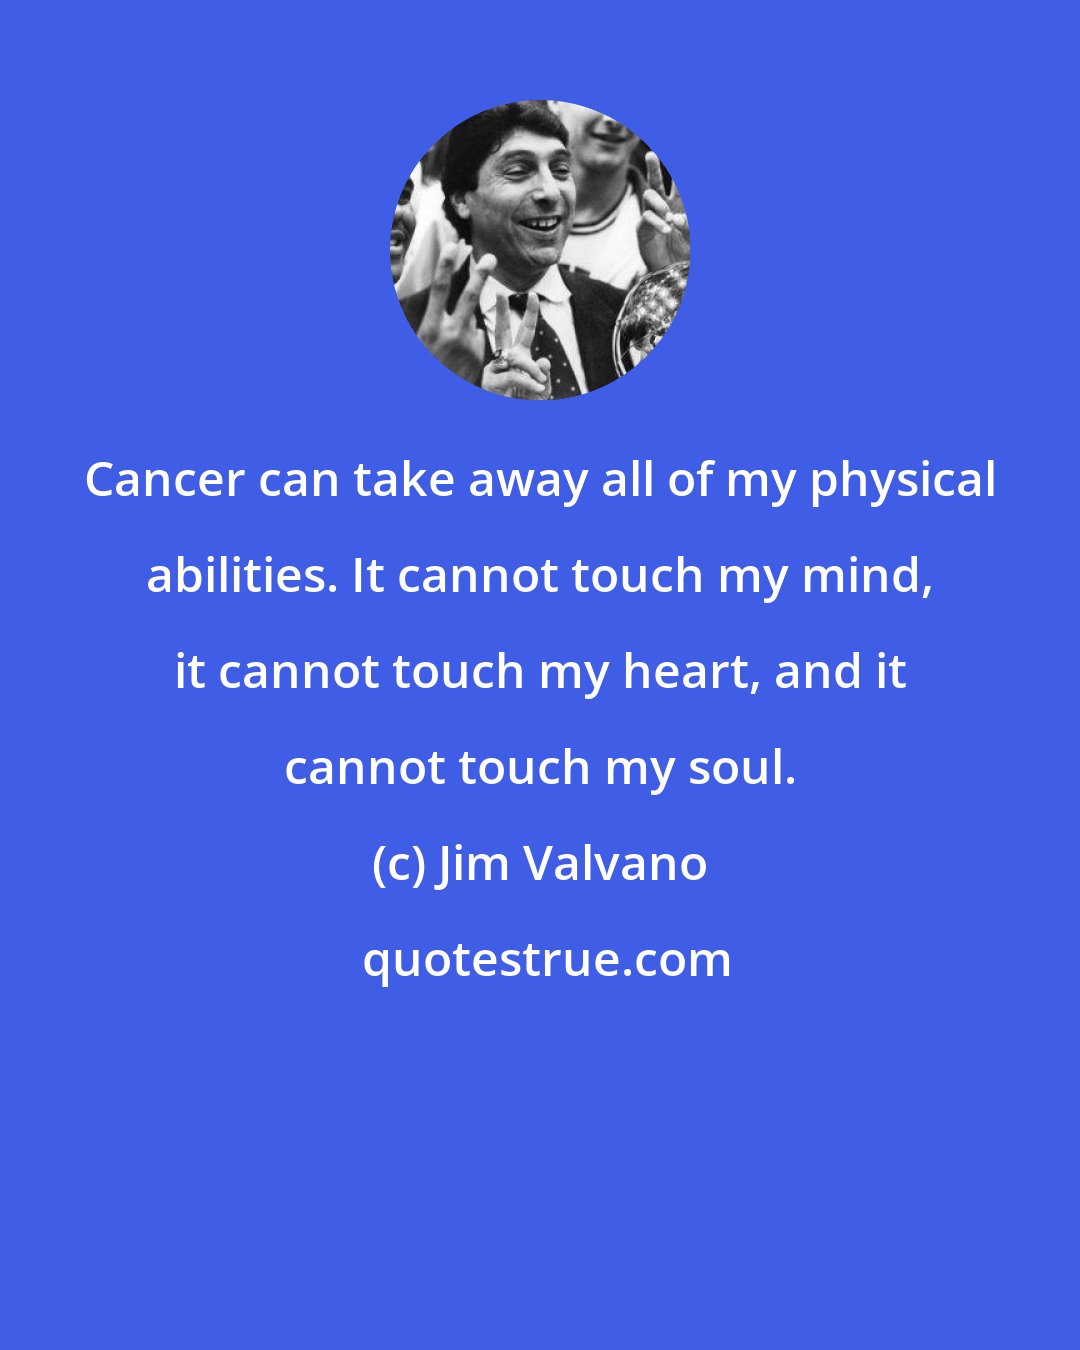 Jim Valvano: Cancer can take away all of my physical abilities. It cannot touch my mind, it cannot touch my heart, and it cannot touch my soul.